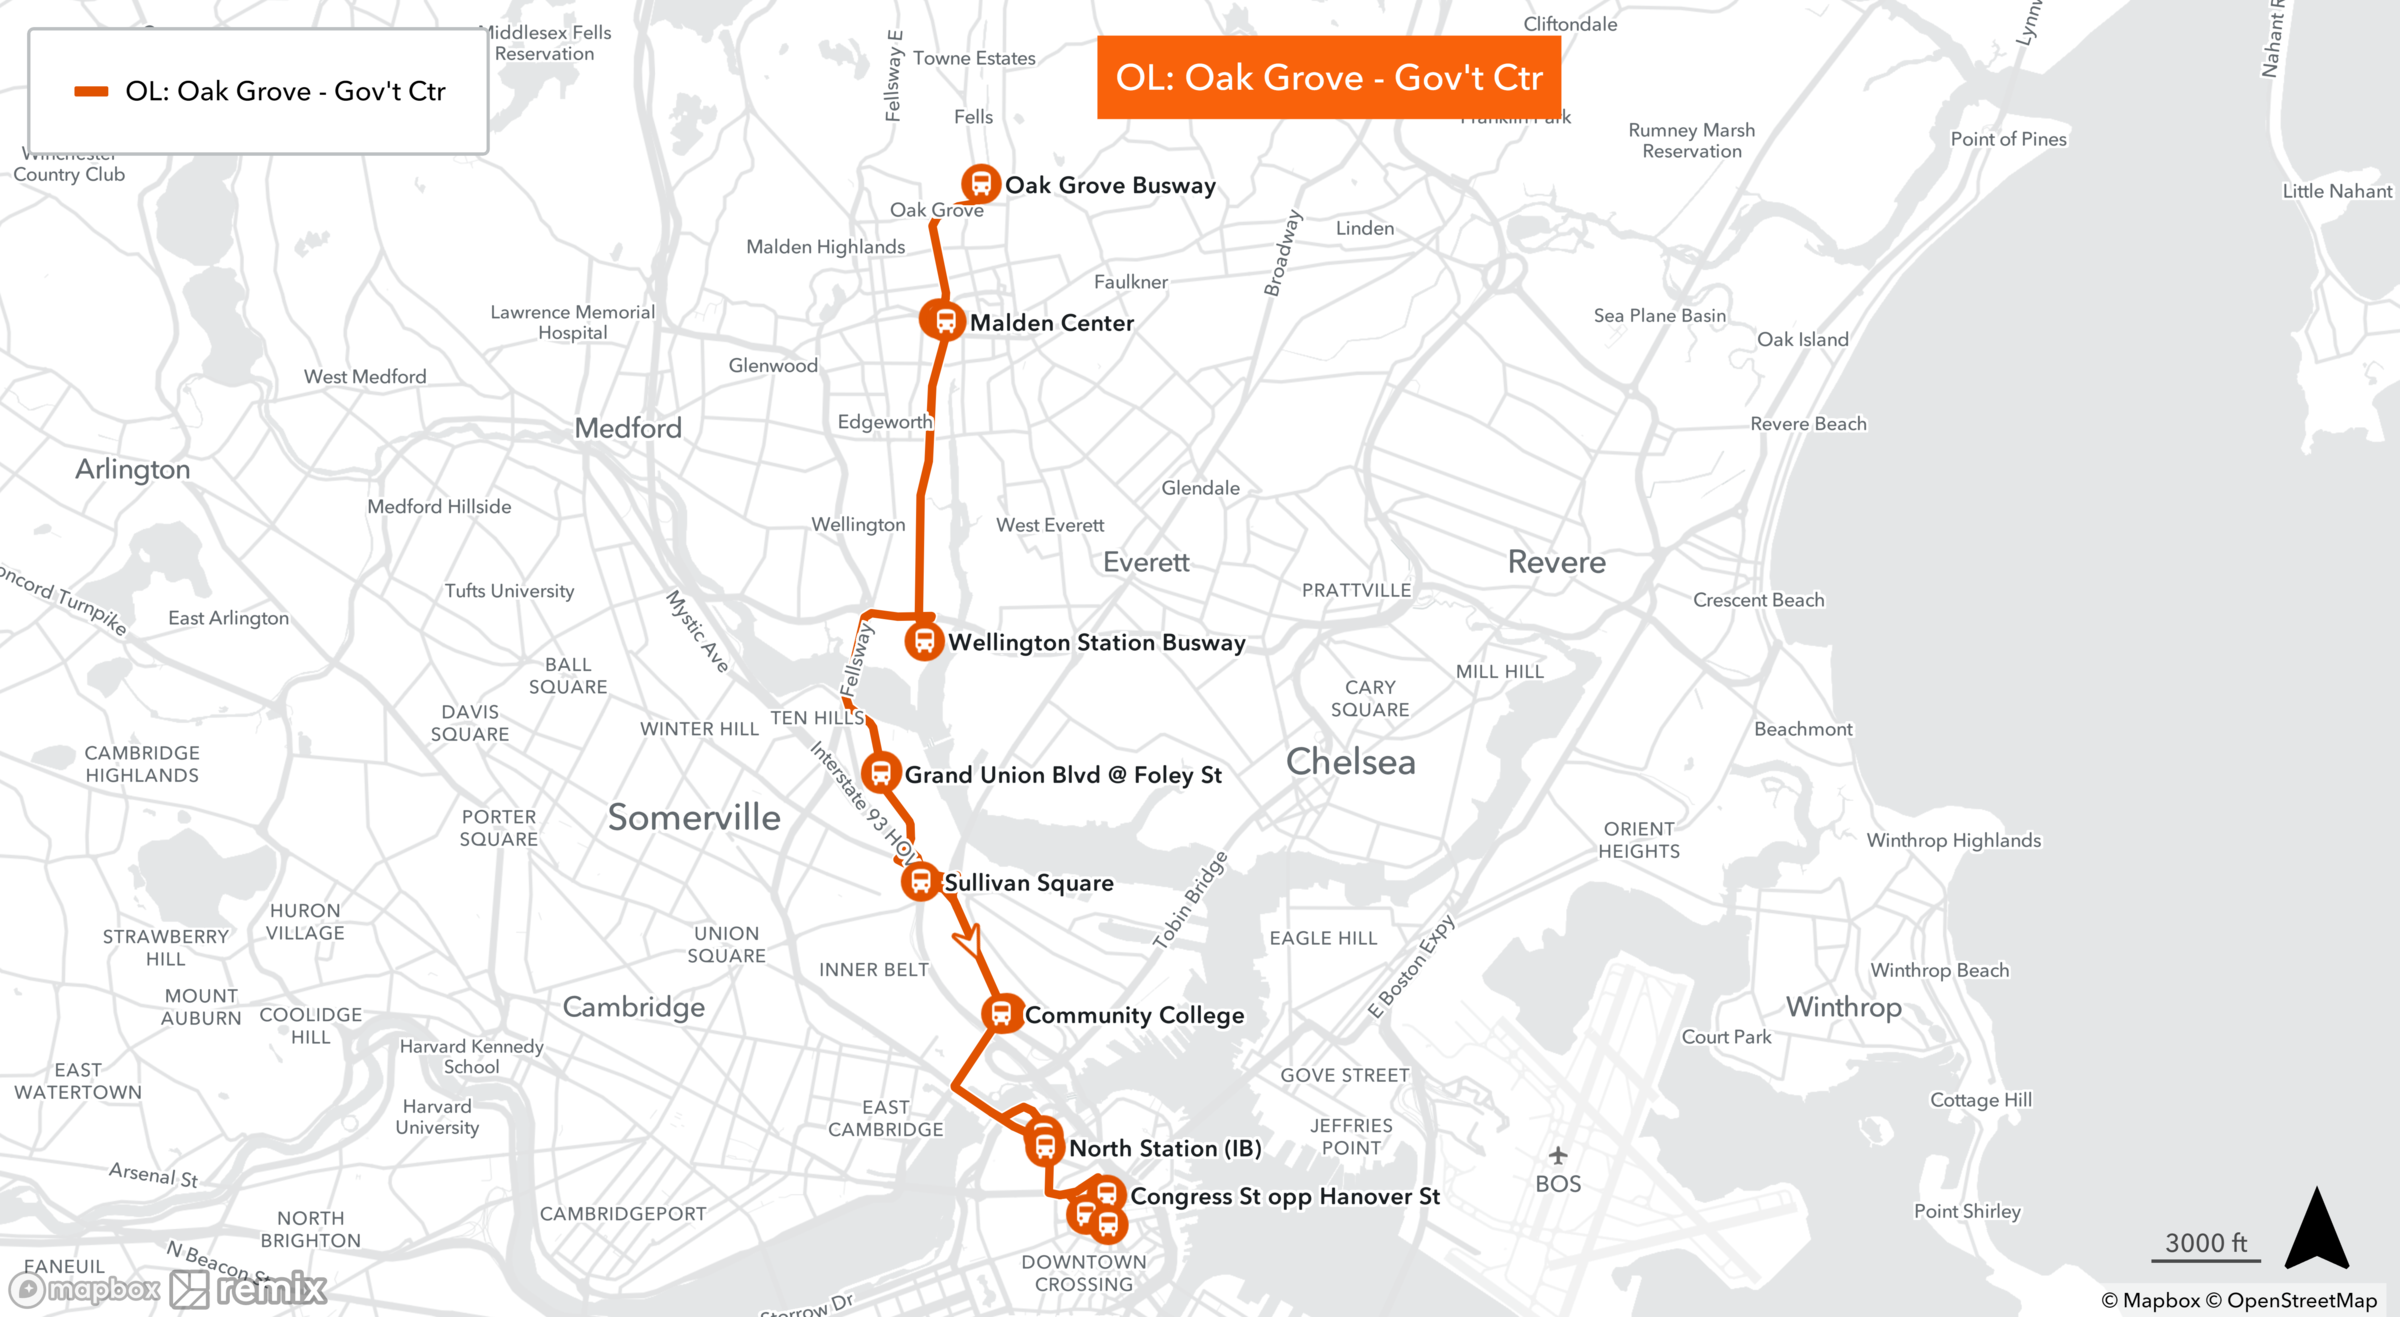 A map showing the Orange Line shuttle's northern route from Boston's Government Center to Oak Grove during the line's shutdown Aug. 19-Sept. 18.